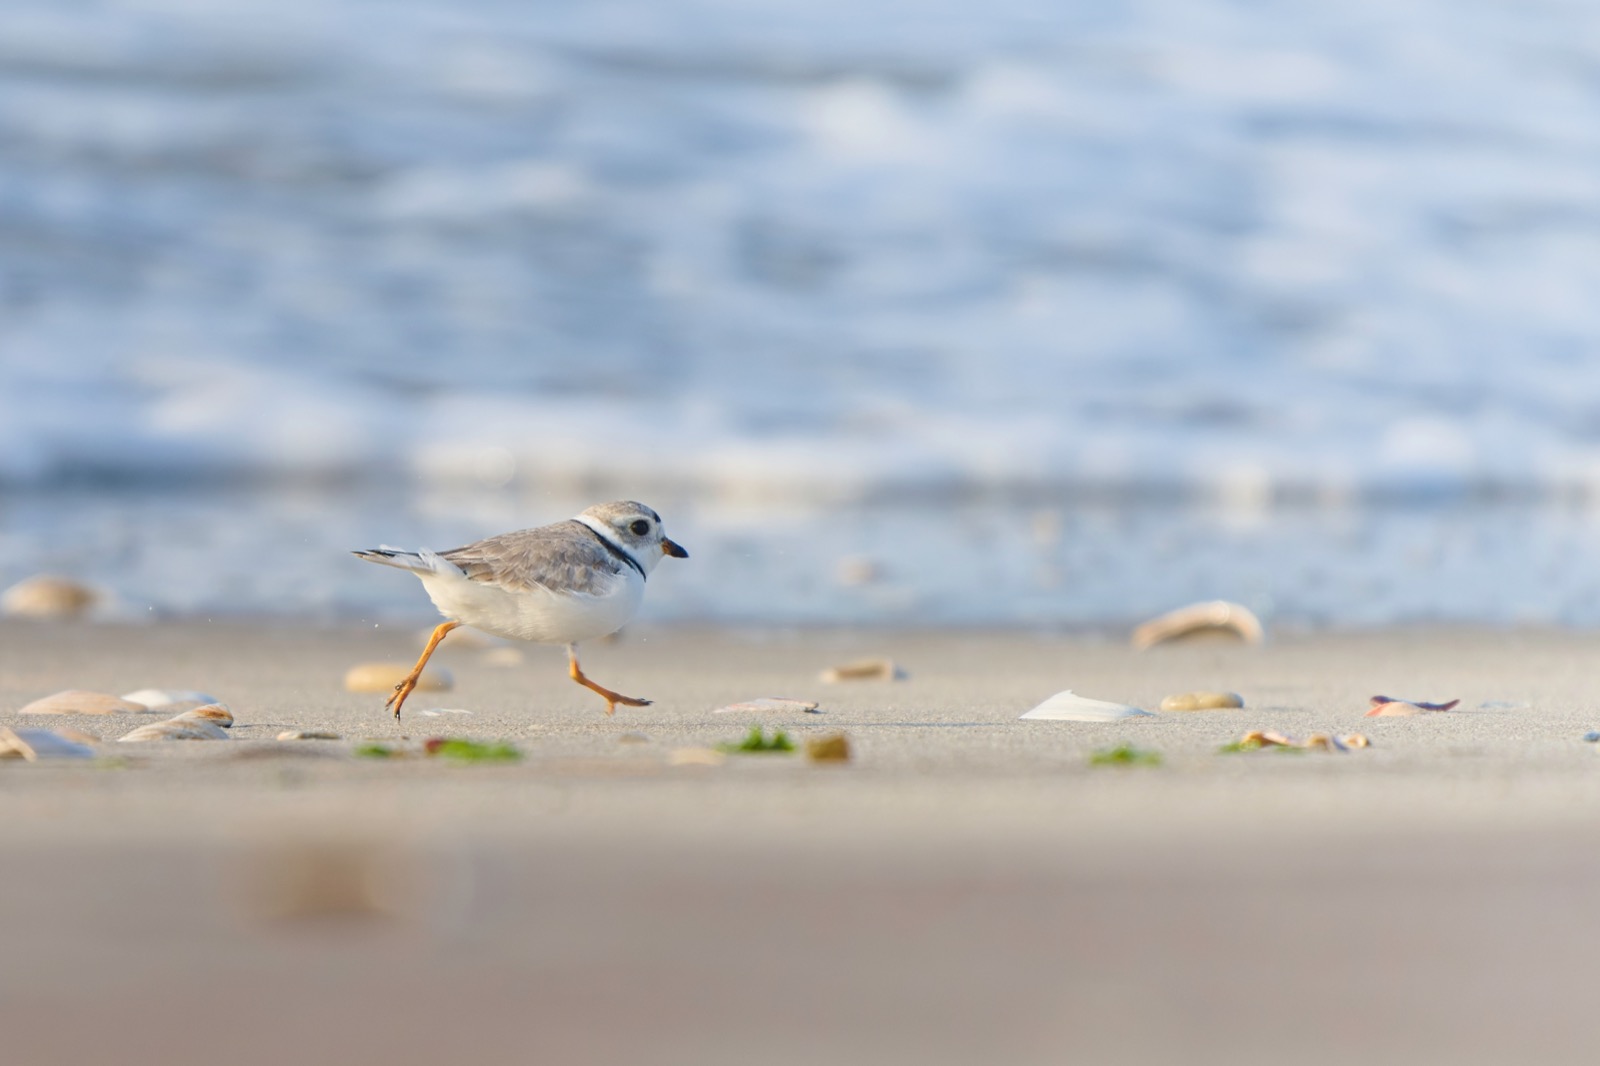 a white and light brown small bird running across the sand with the ocean in the background